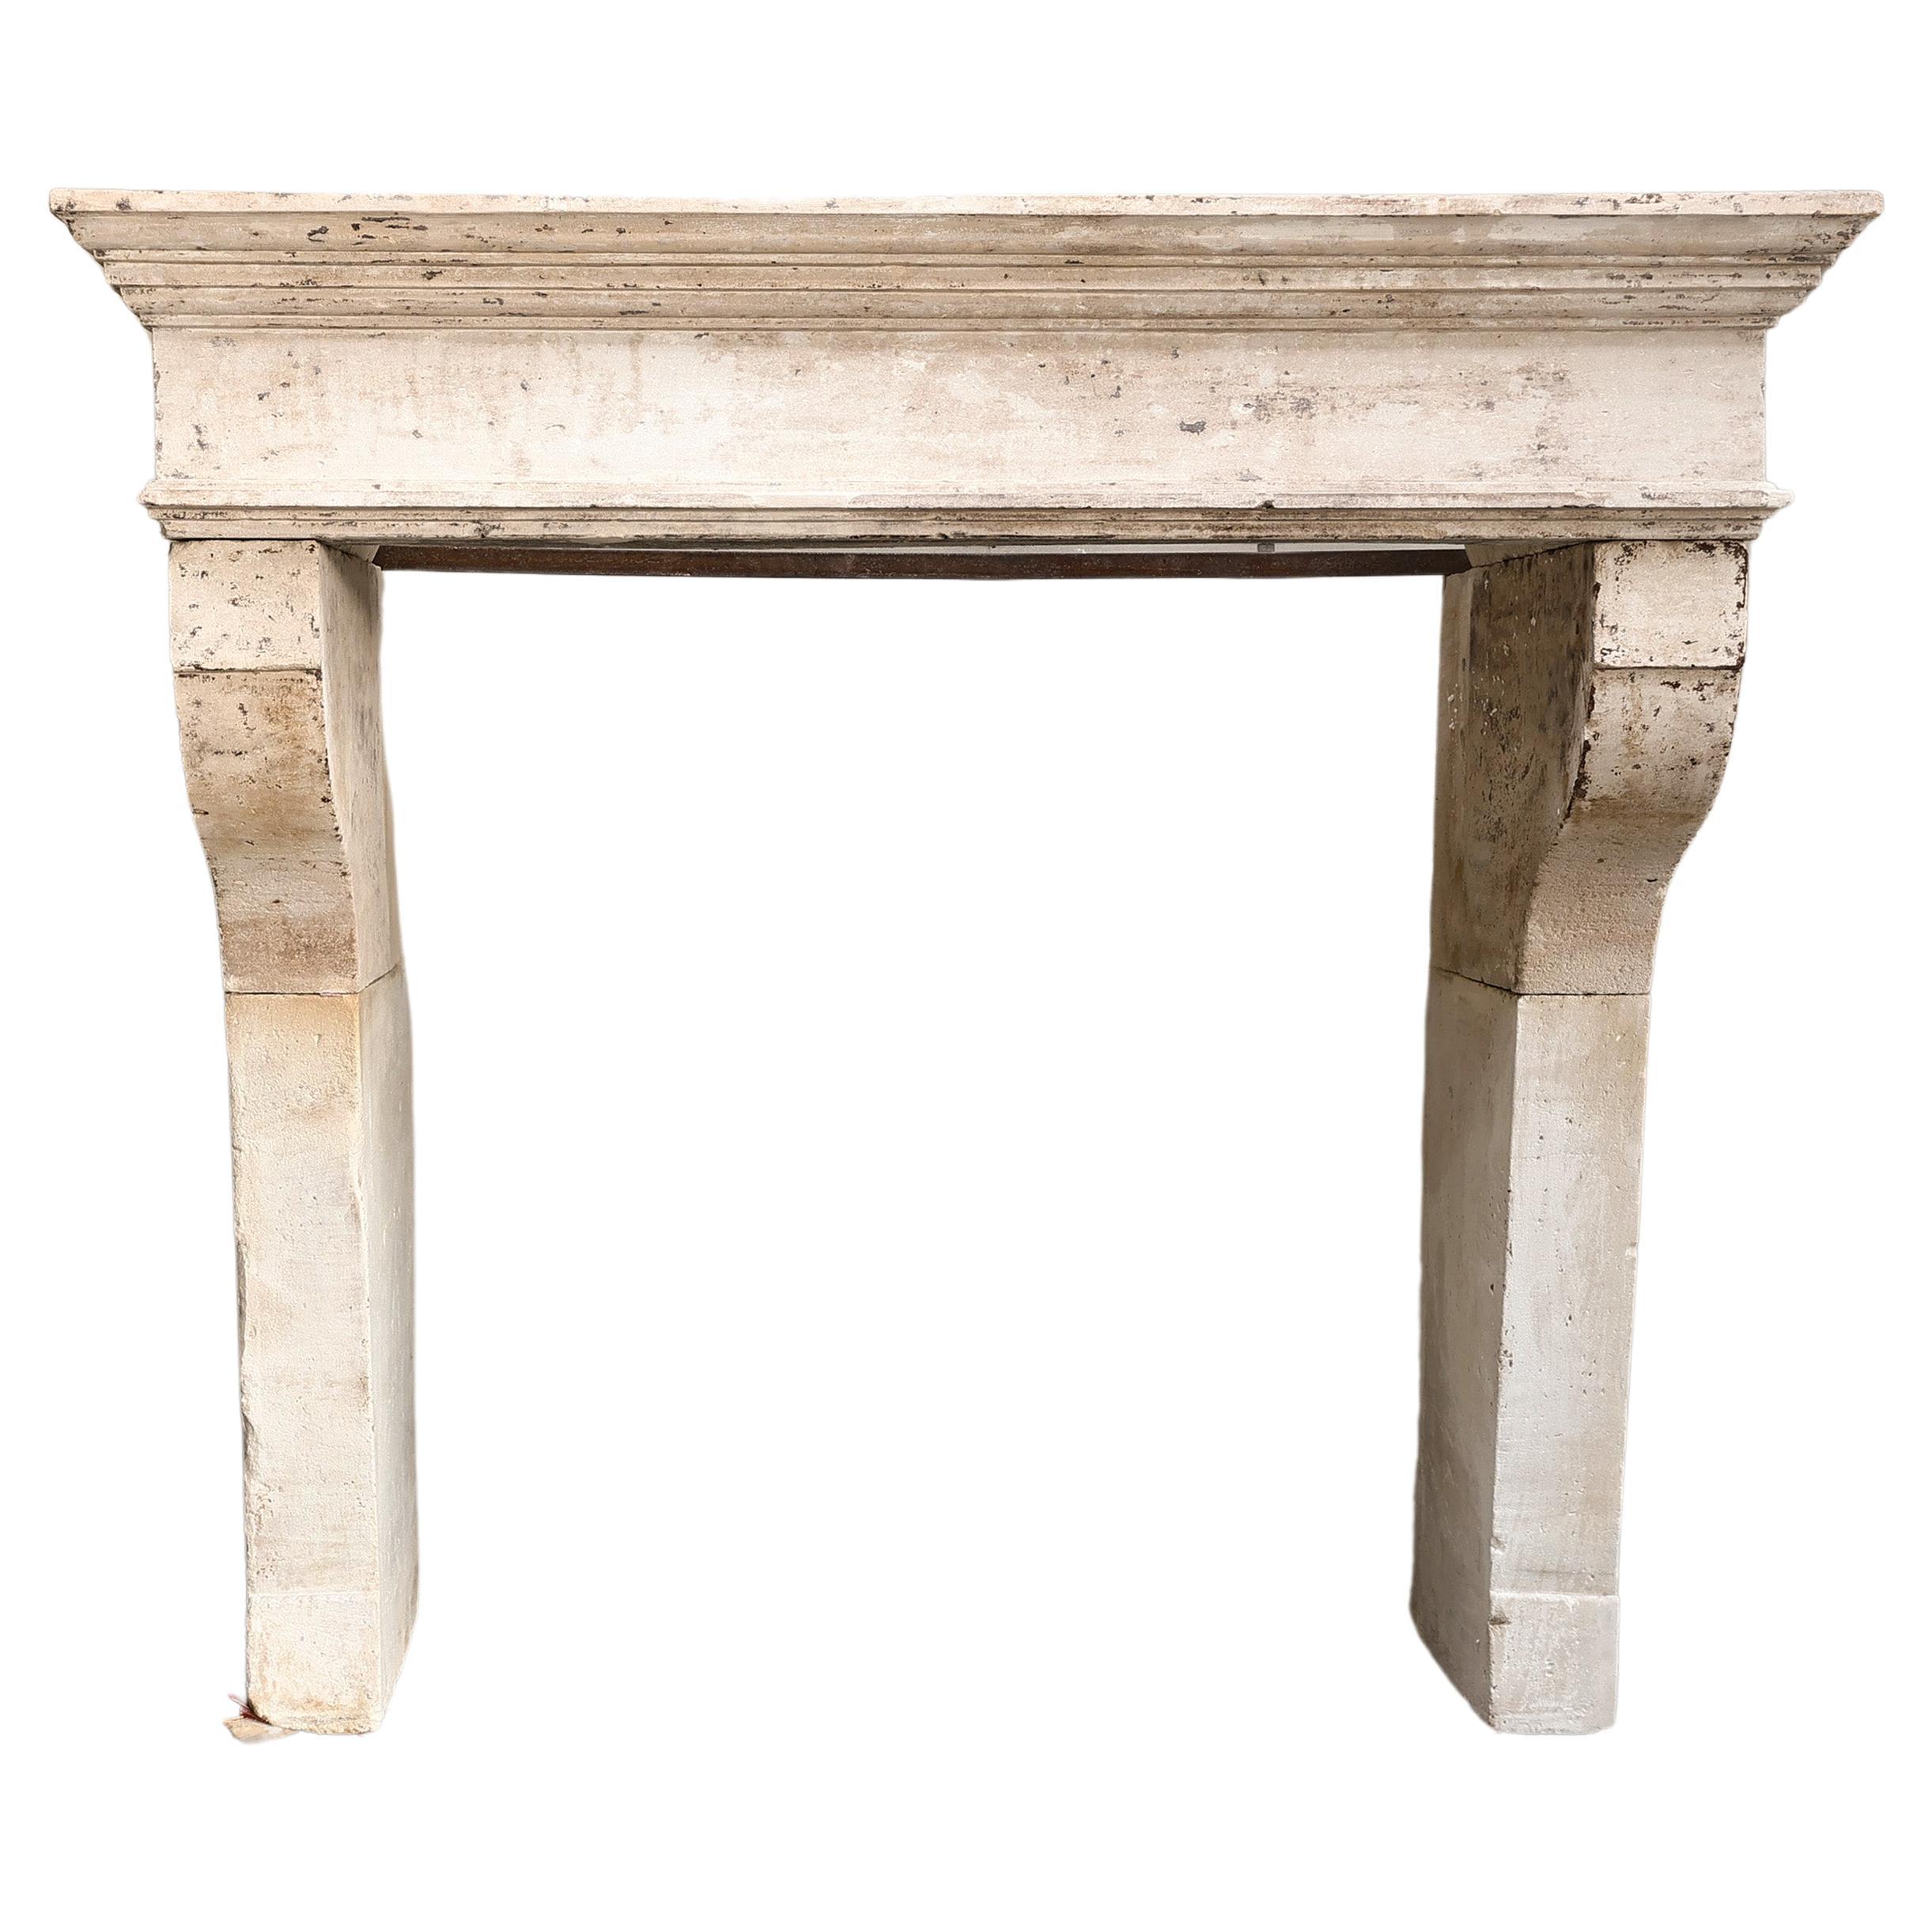 19th century Campagnarde style antique fireplace of French limestone